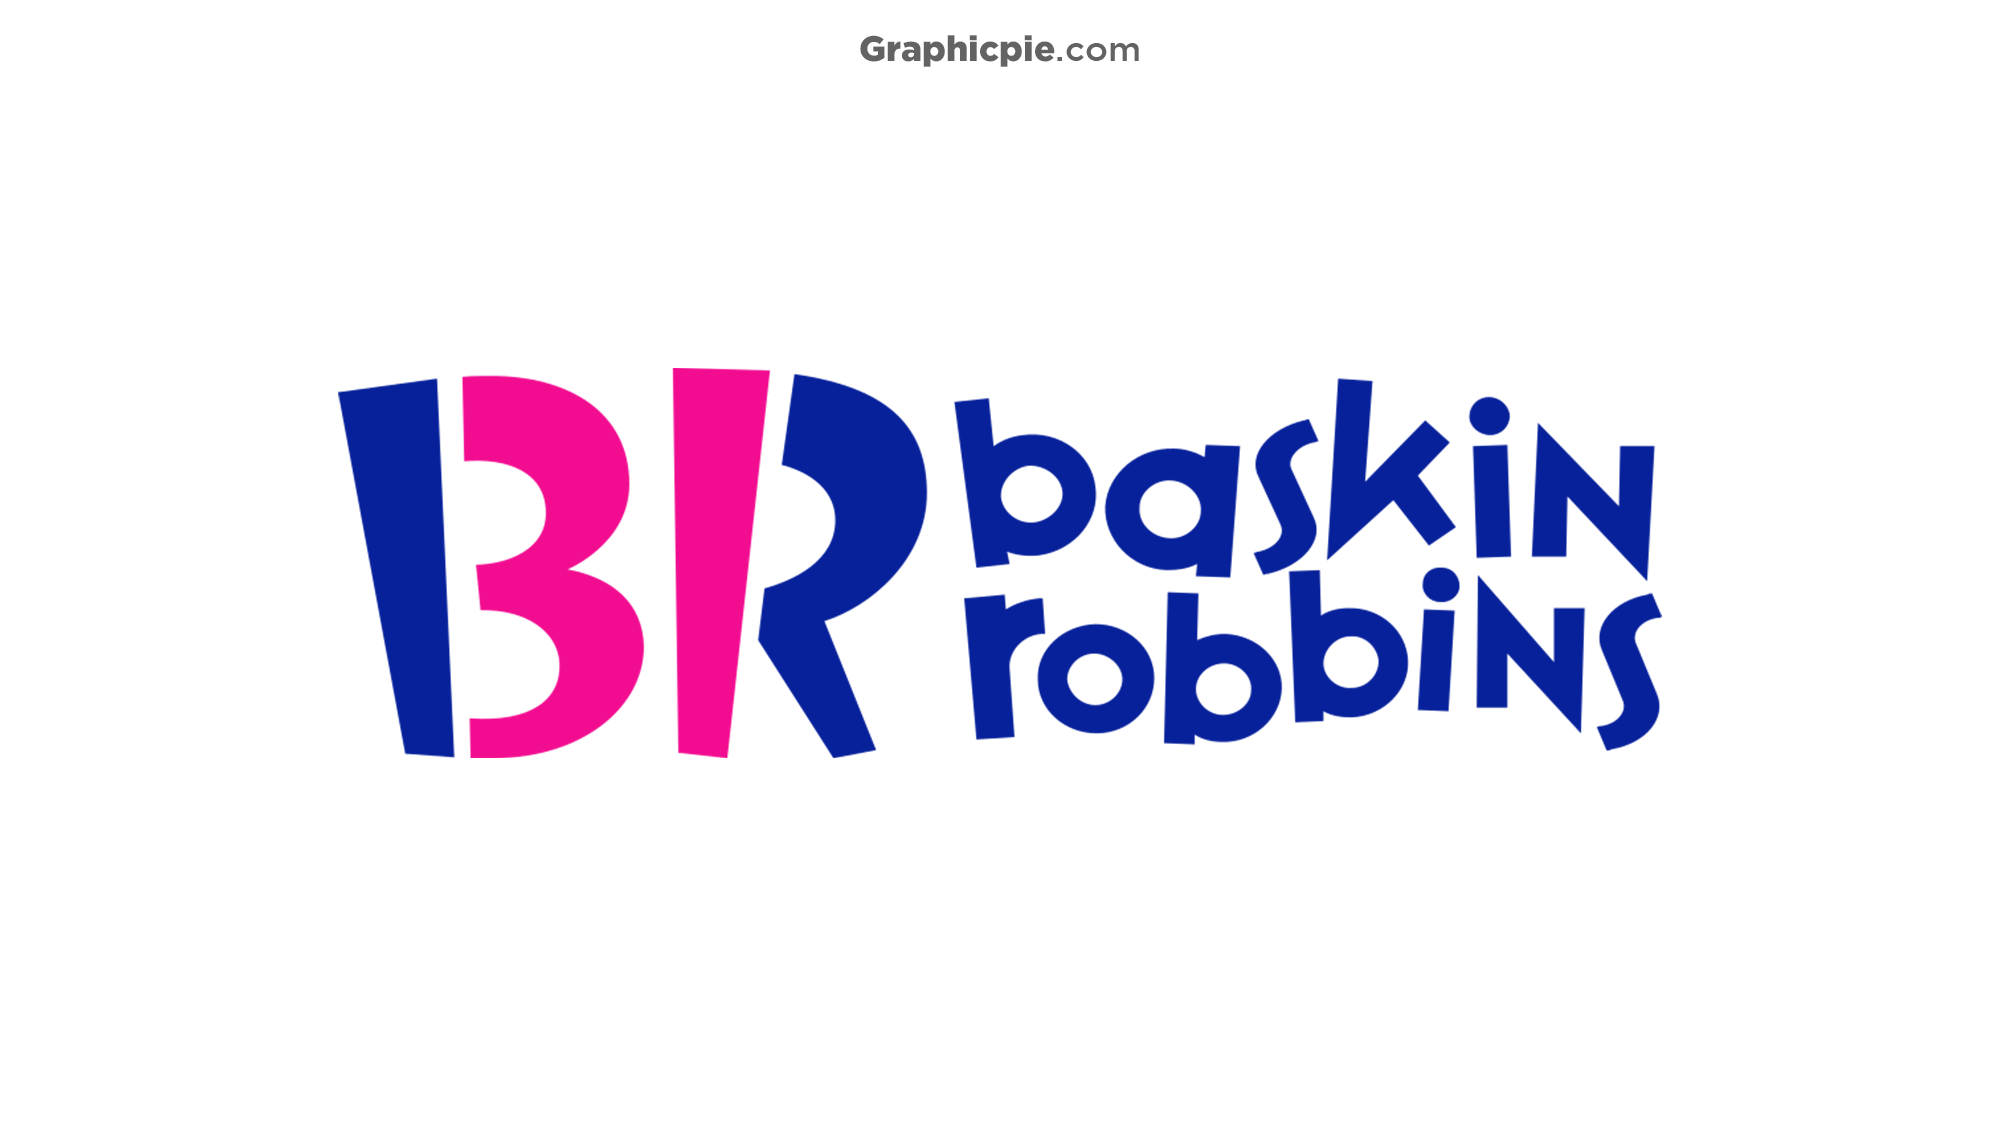 baskin-robbins-logo-meaning-history-graphic-pie